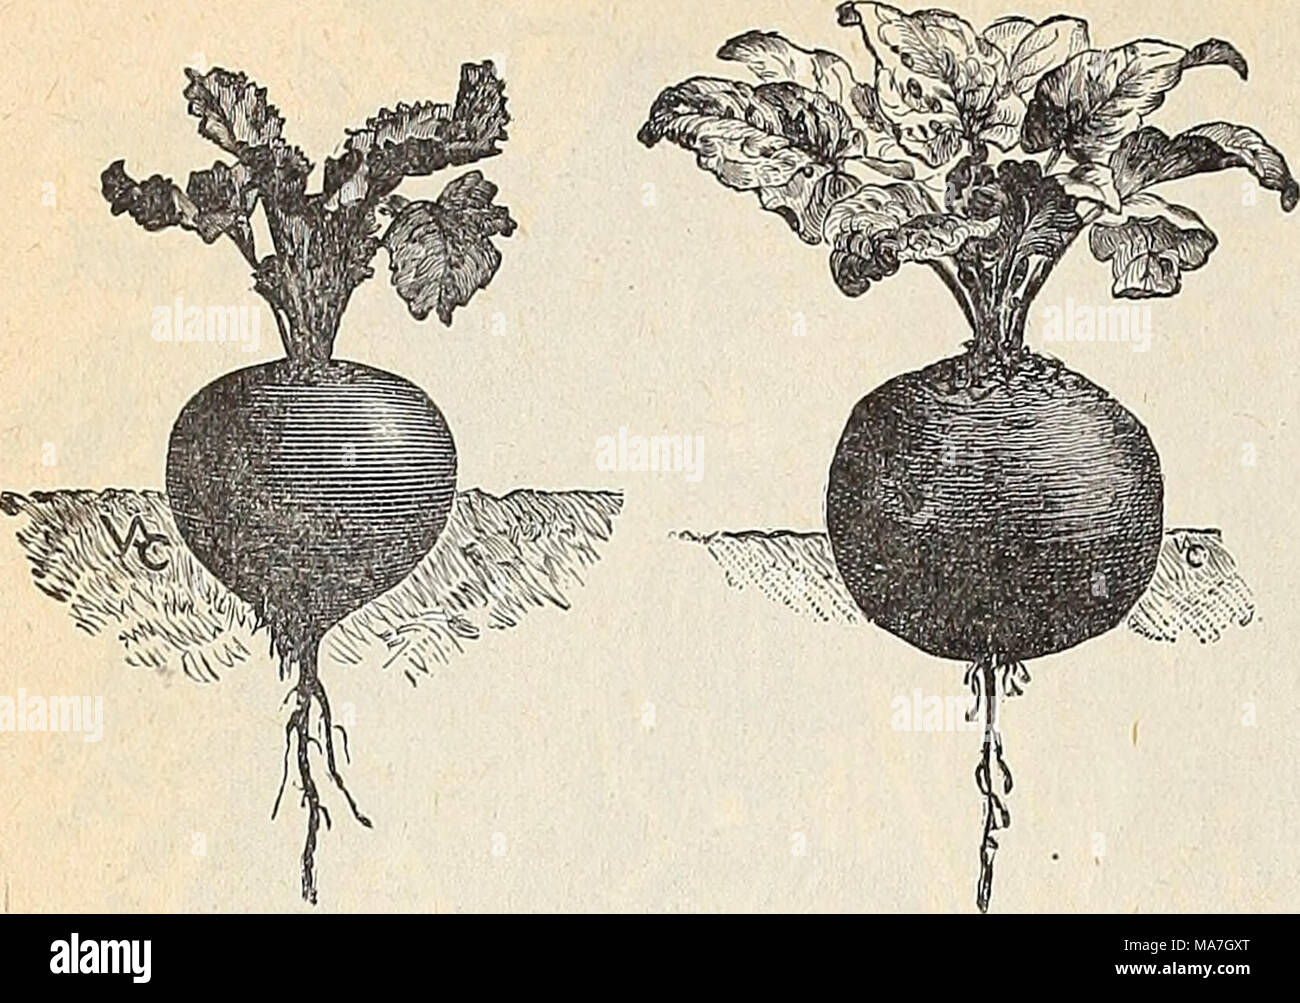 . E. H. Hunt : seedsman . The soil which is best suited for the culture of the beet is that which is rather light, provided that it is thoroughly enriched with manure. For an early sup- ply sow in spring, as soon as the ground becomes fit to work, in drills about one foot apartand two inches deep. Sow again in May for main crop and in June for winter use. Whefl plants have attained three or four leaves,thin out, so that they may stand eight or nine inches apart. One ounce to JO feet of drill; j to 6 lbs. to acre. Eclipse. This is the earliest DEWING'S BBET. ECLIPSE BEET. beet in cultivation, a Stock Photo